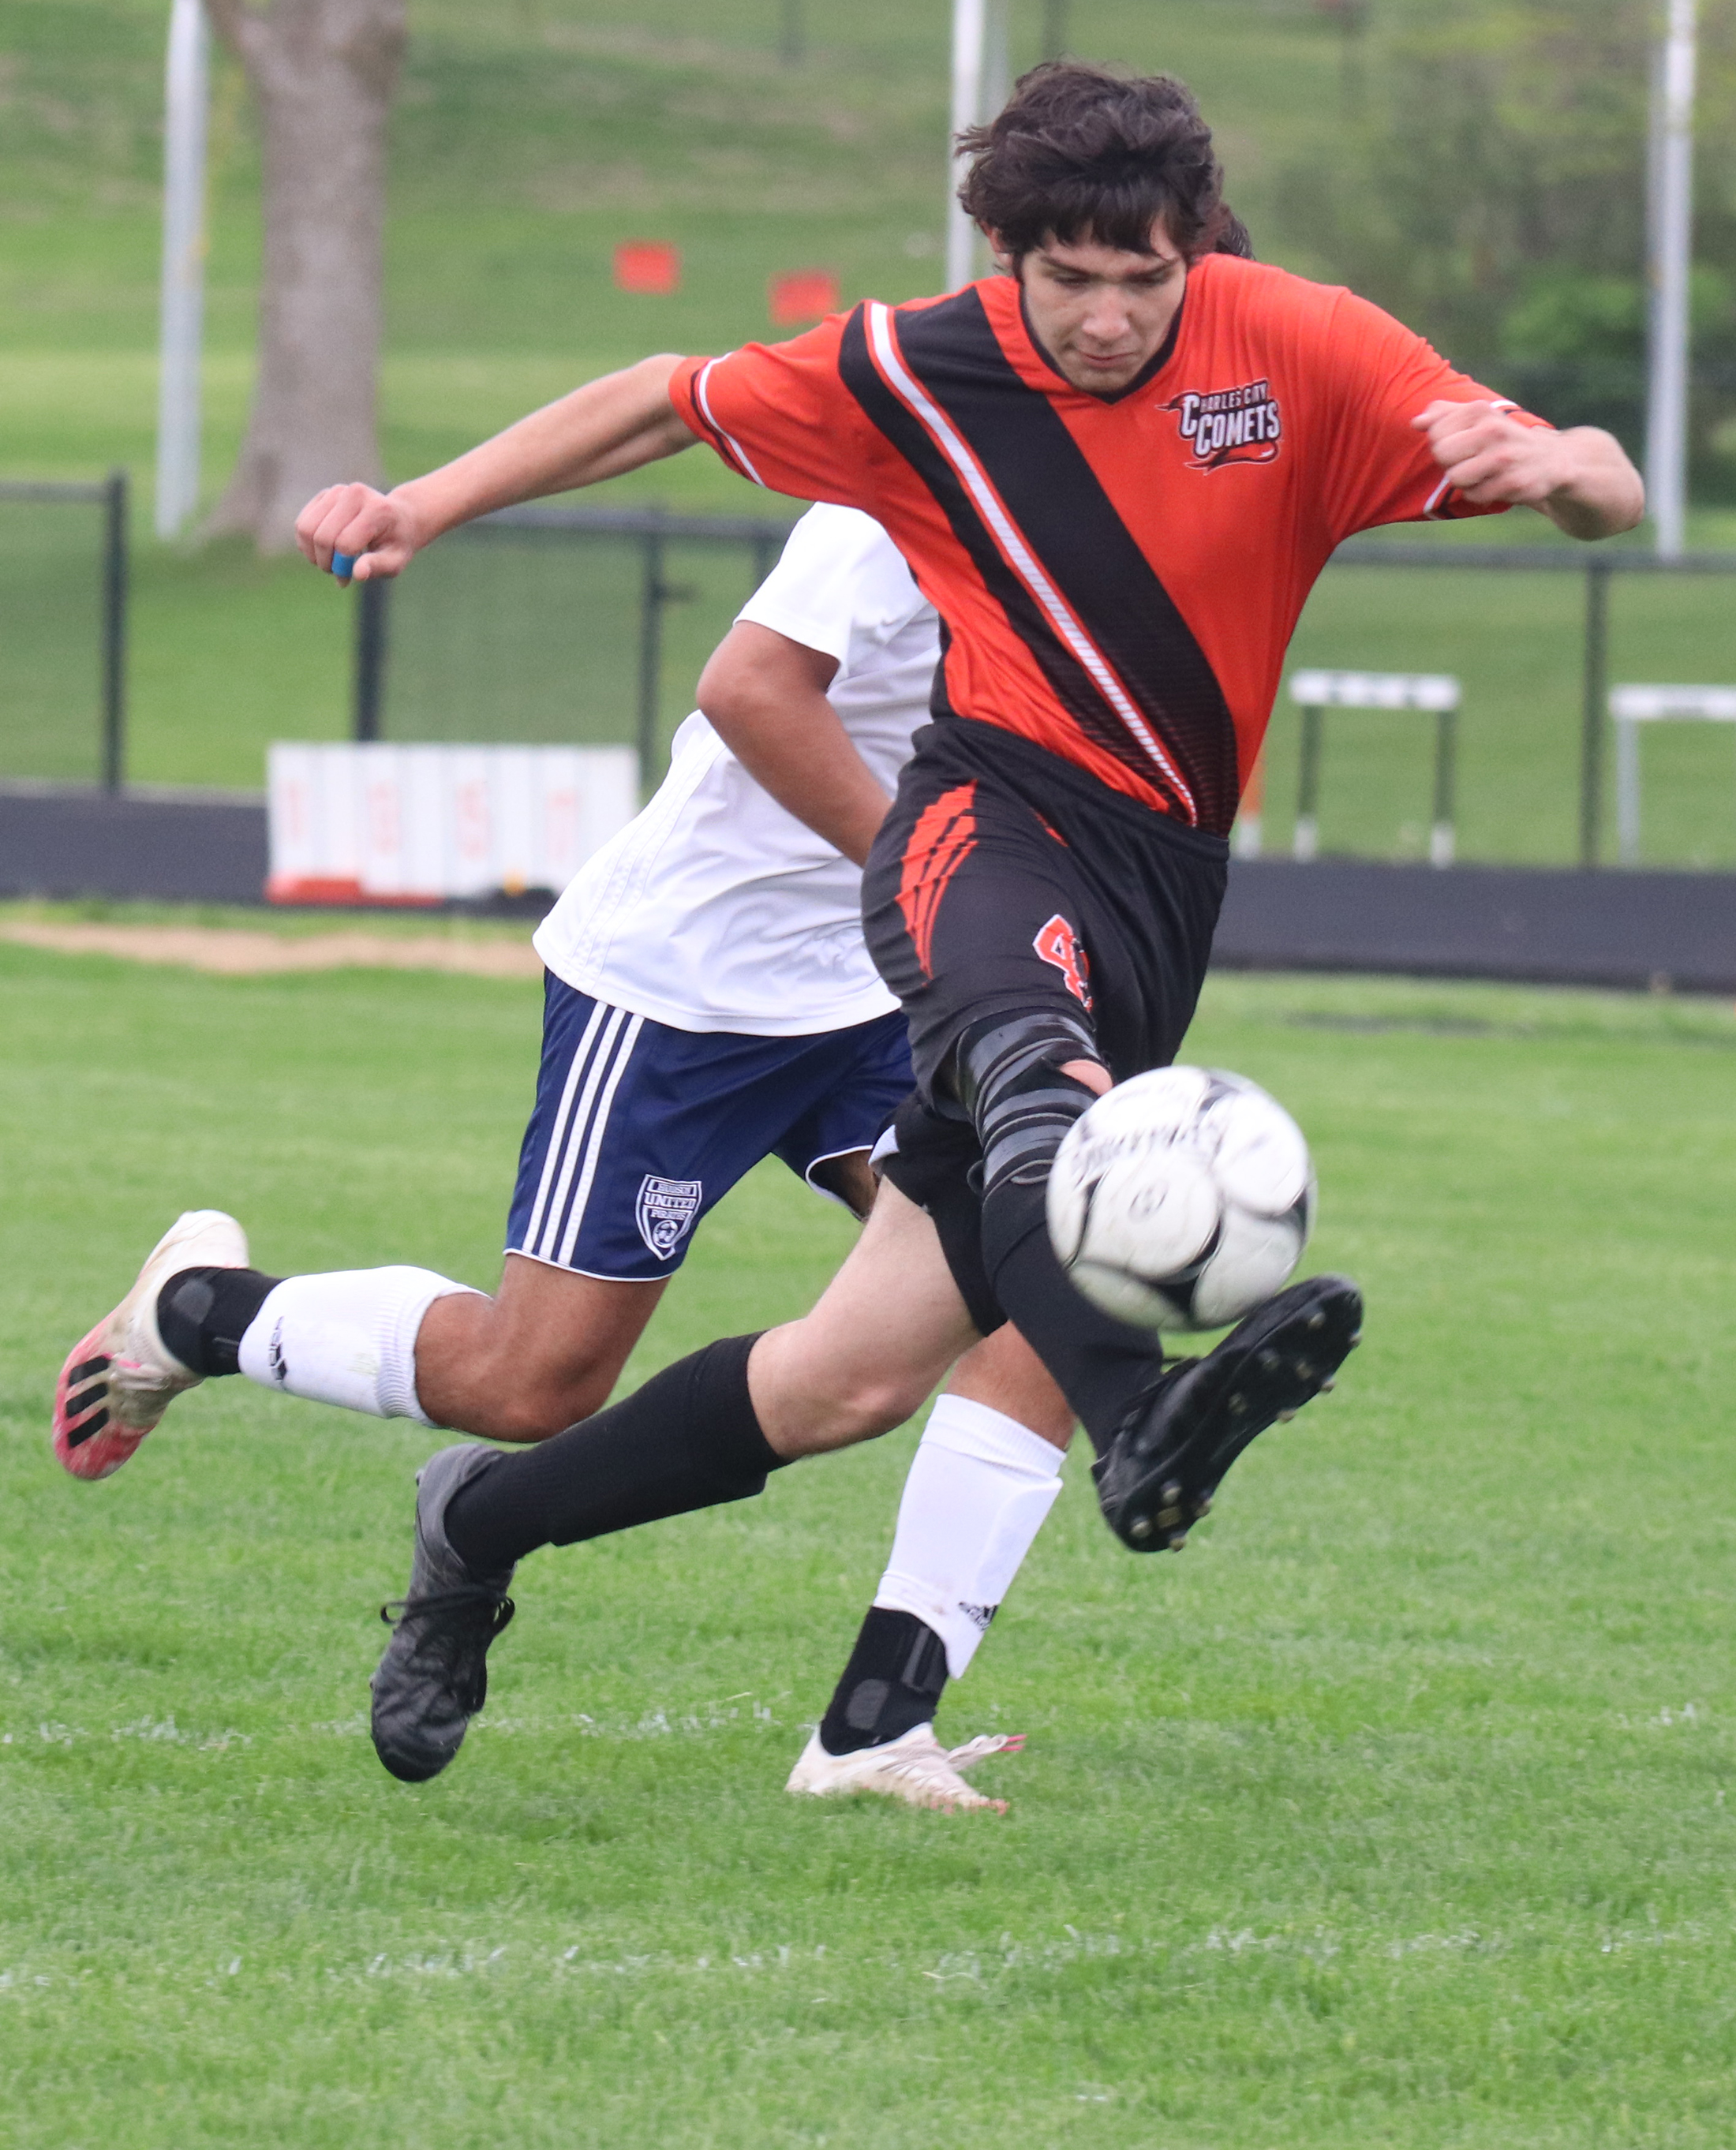 Comets fall to Pirates 10-0 in soccer regular-season finale